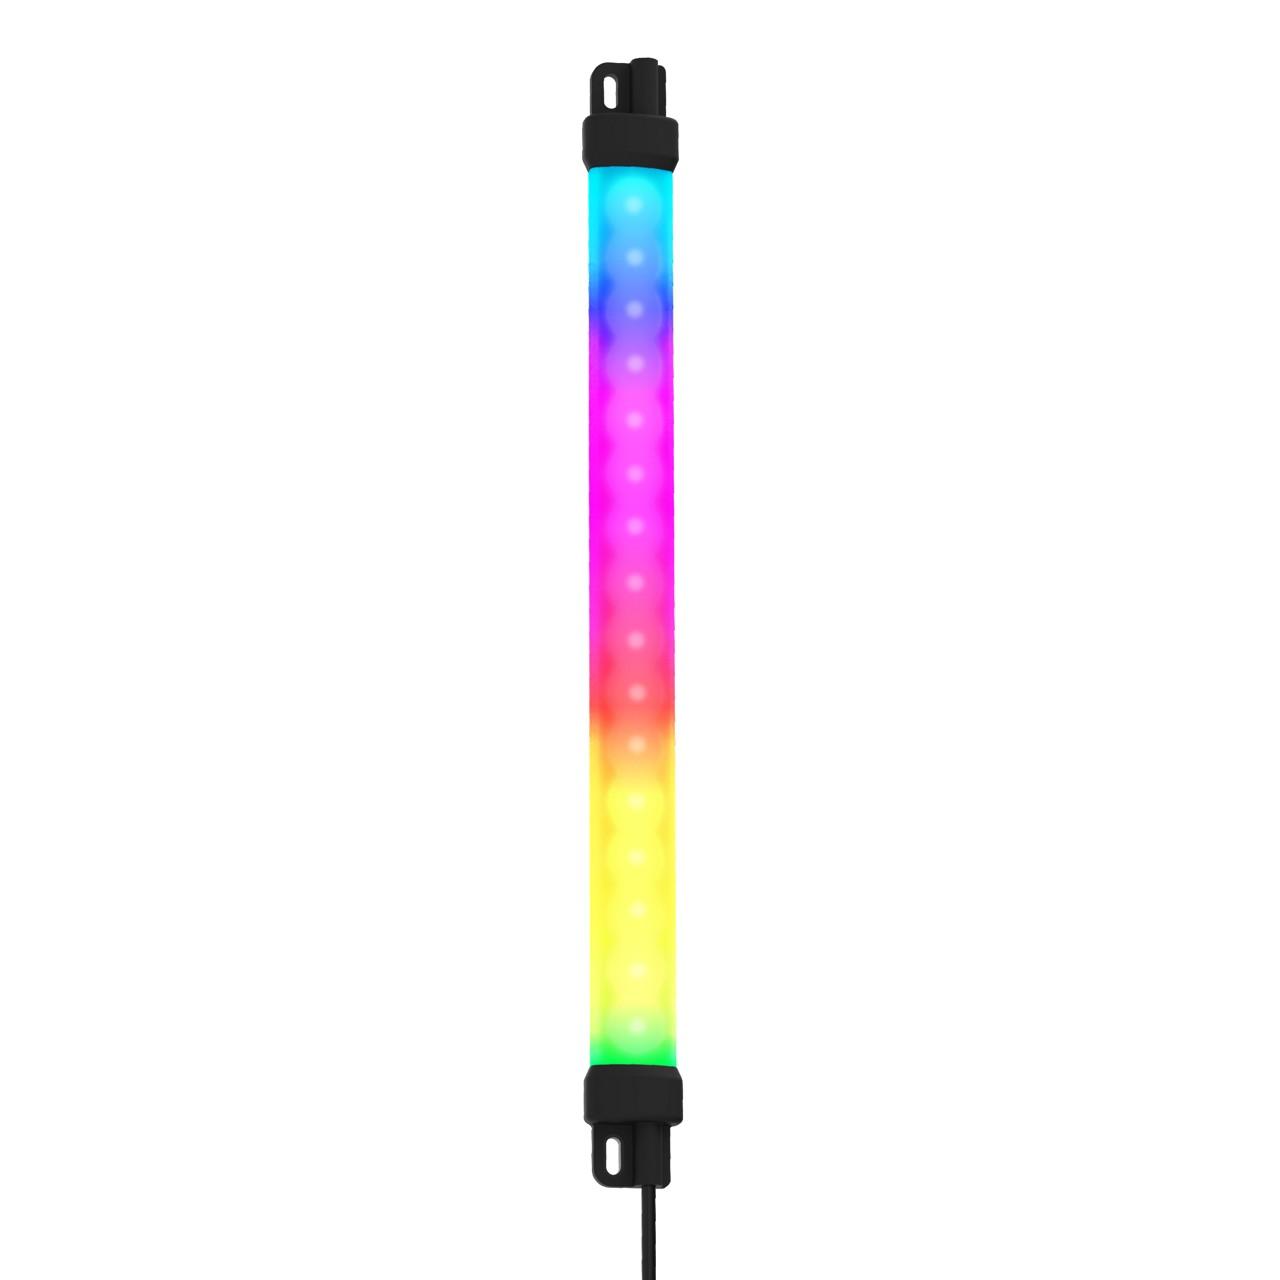 Banner WLS15PXRGB0640DSSQP WLS15 Pro Light Strip with PICK-IQ Series; Diffuse Window; Length: 640 mm, Voltage: 12 -30 V dc; Environmental Rating: IP66; IP67, Color: RGB; Non-Cascadable, Euro 4-pin 150 mm (6 in) PVC Pigtail